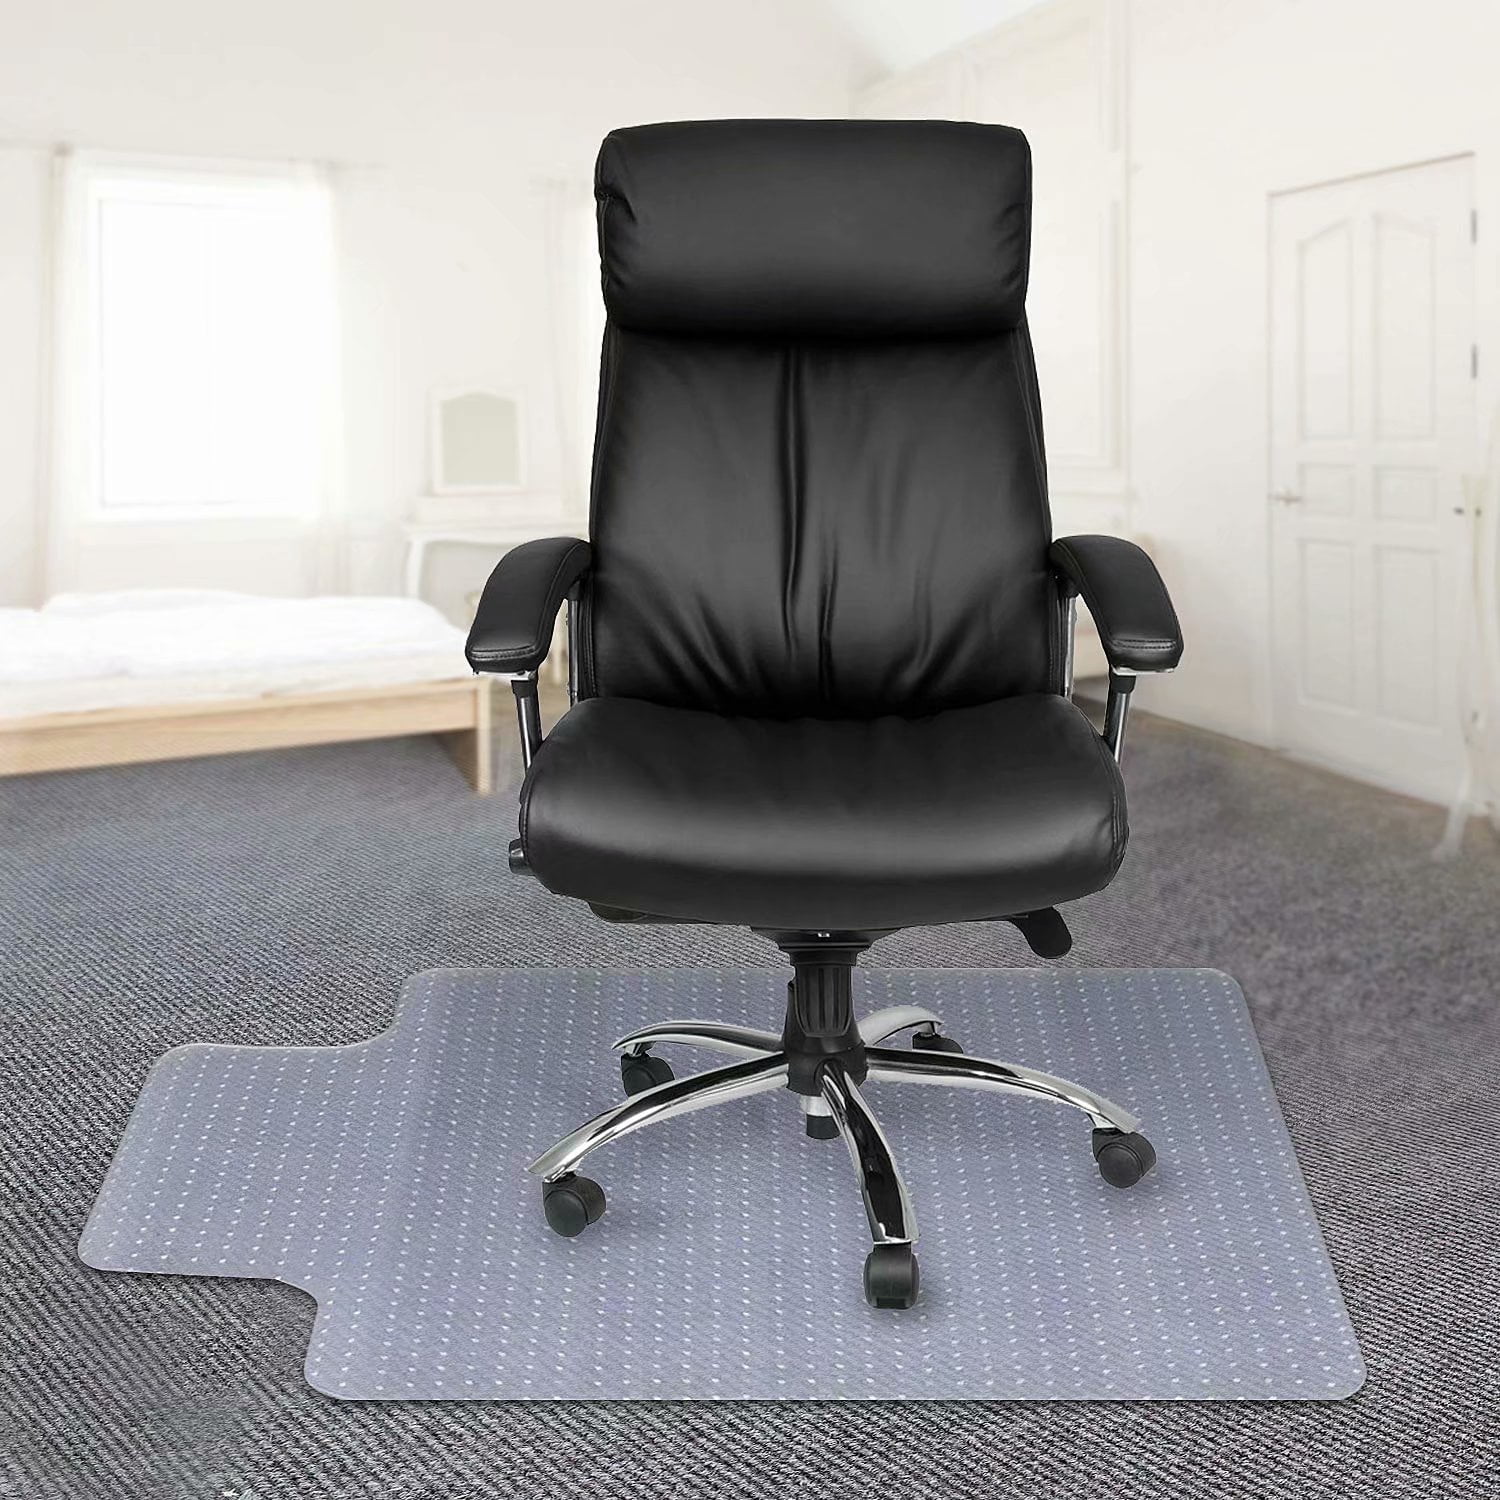 36 x 48 Office Chair Mat for Hardwood Chair Mats for Carpeted Floors Desk Chair Mat Best for Rolling Chair and Computer Desk for Office and Home Non-Curve Chair Mats with Anti-Slip 